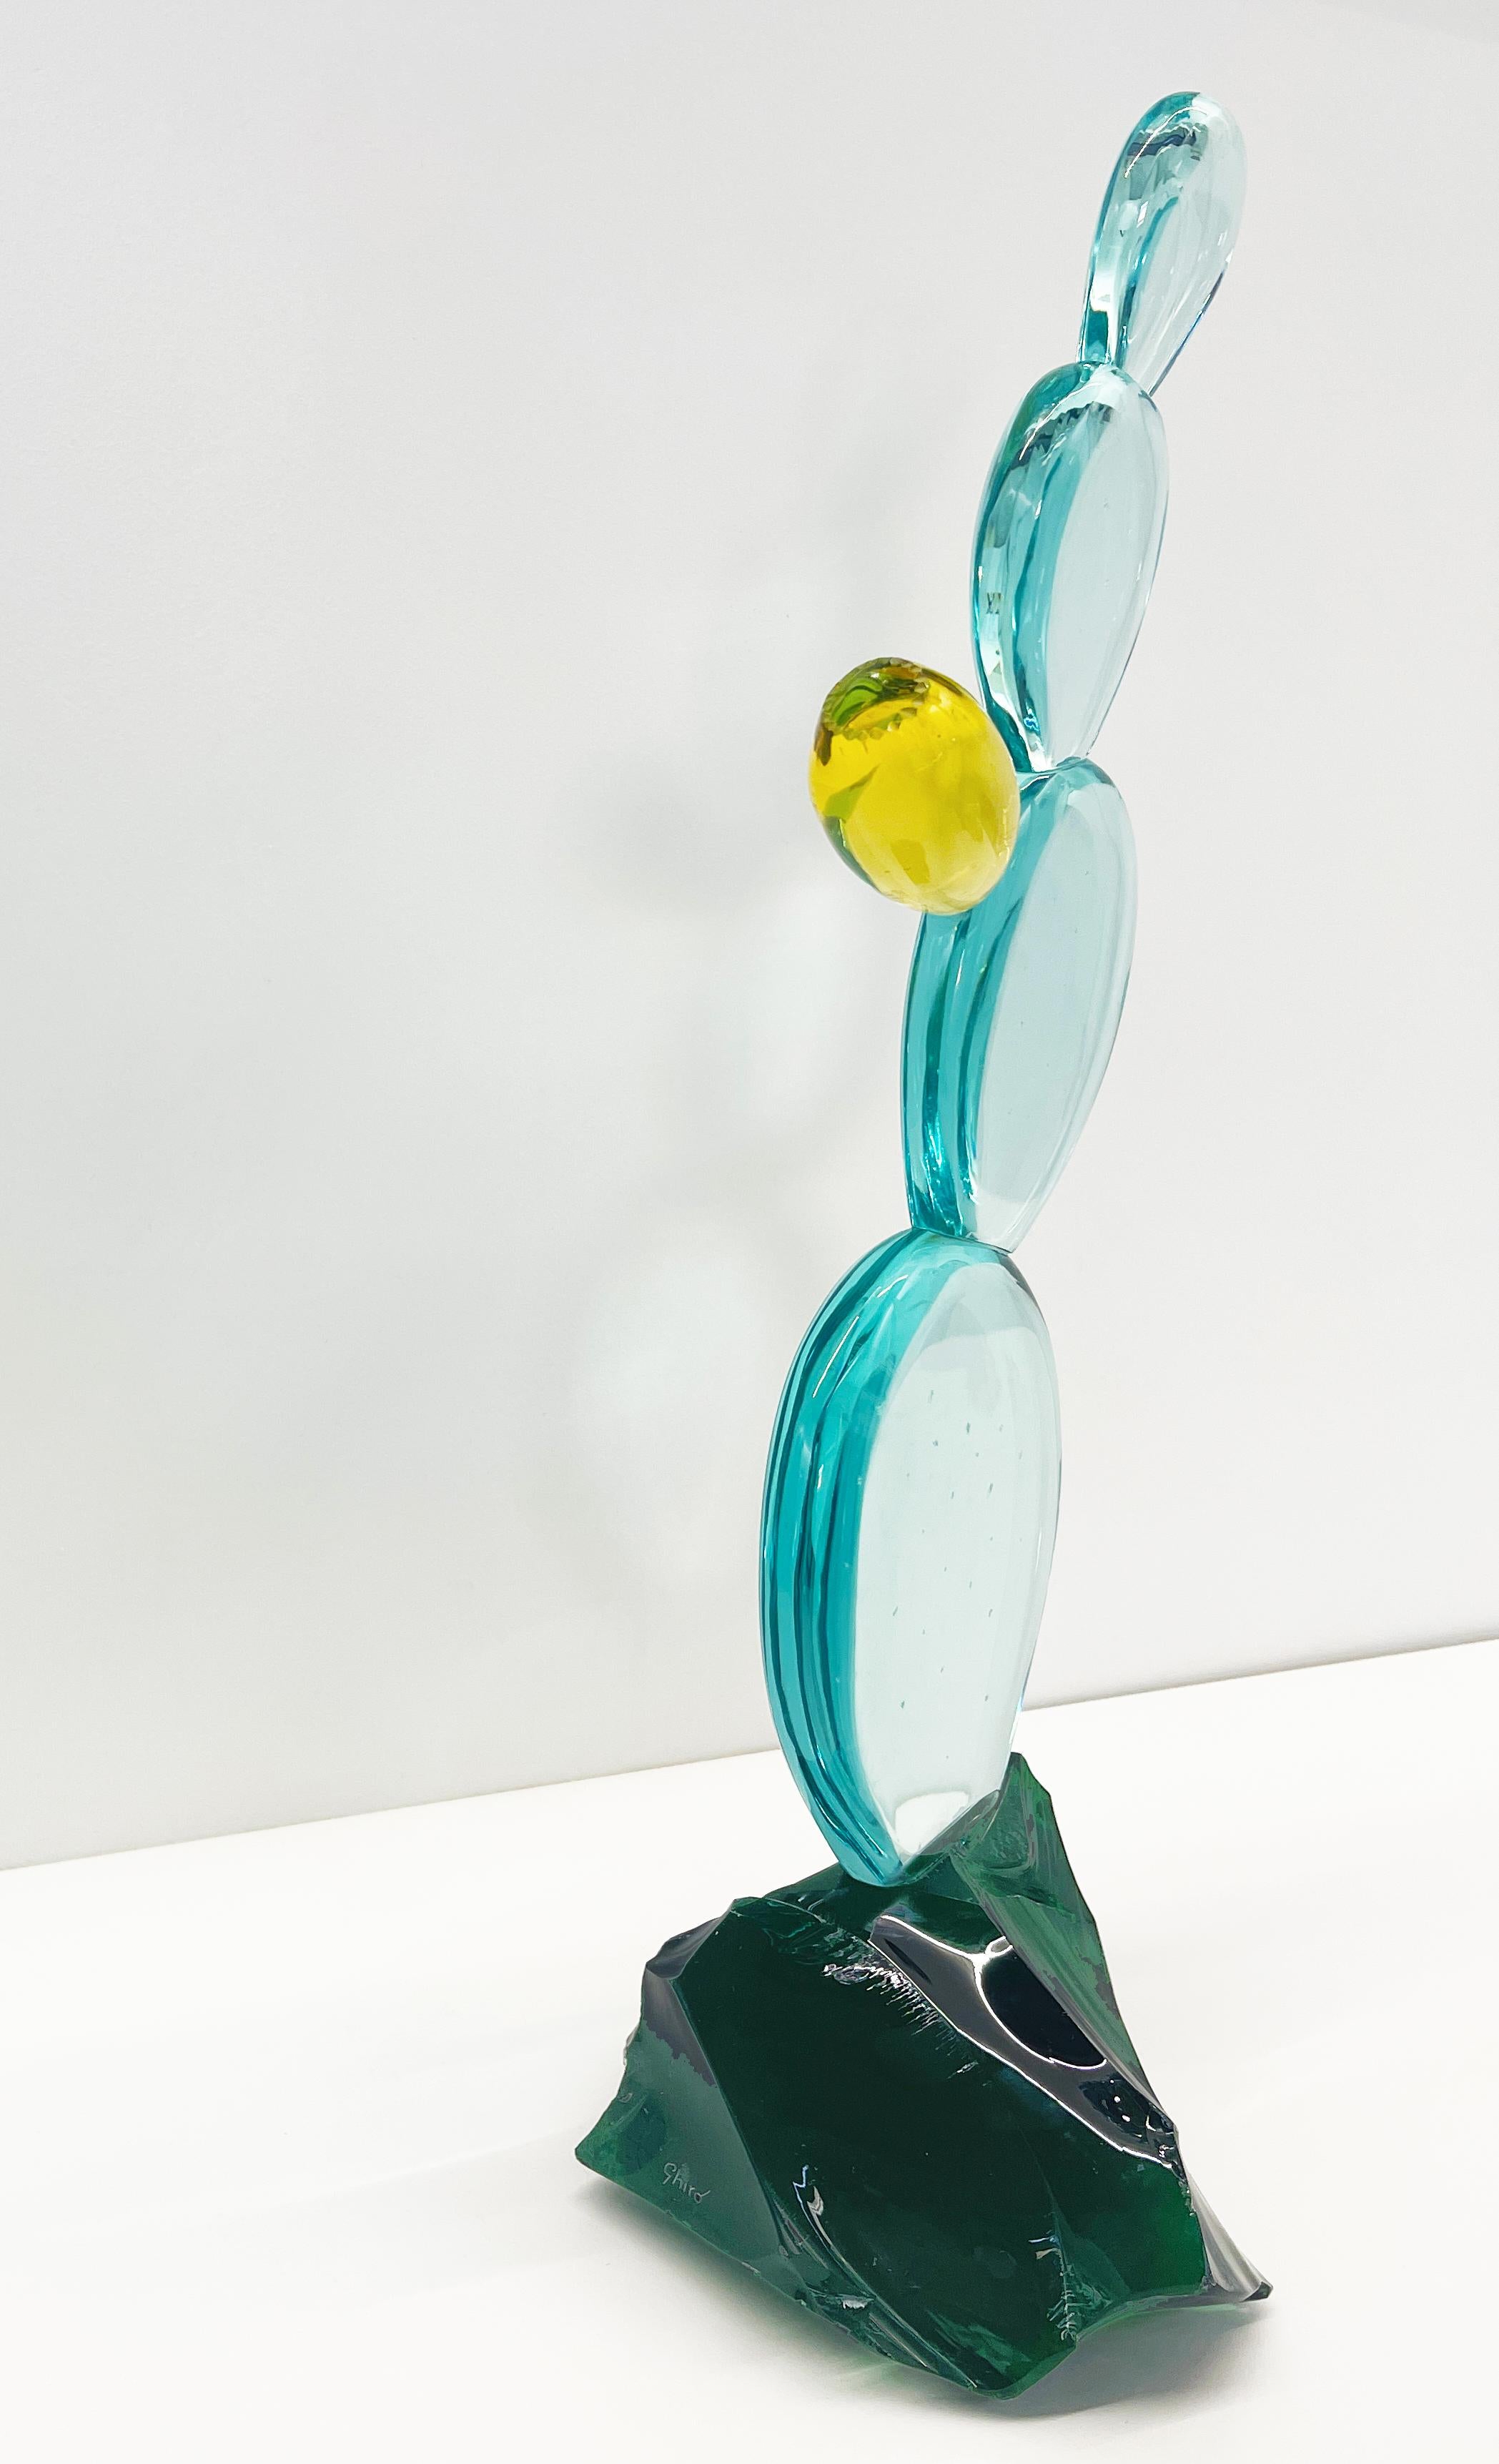 Glass Contemporary 'Cactus with Flower' Handmade Crystal Sculpture by Ghirò Studio For Sale